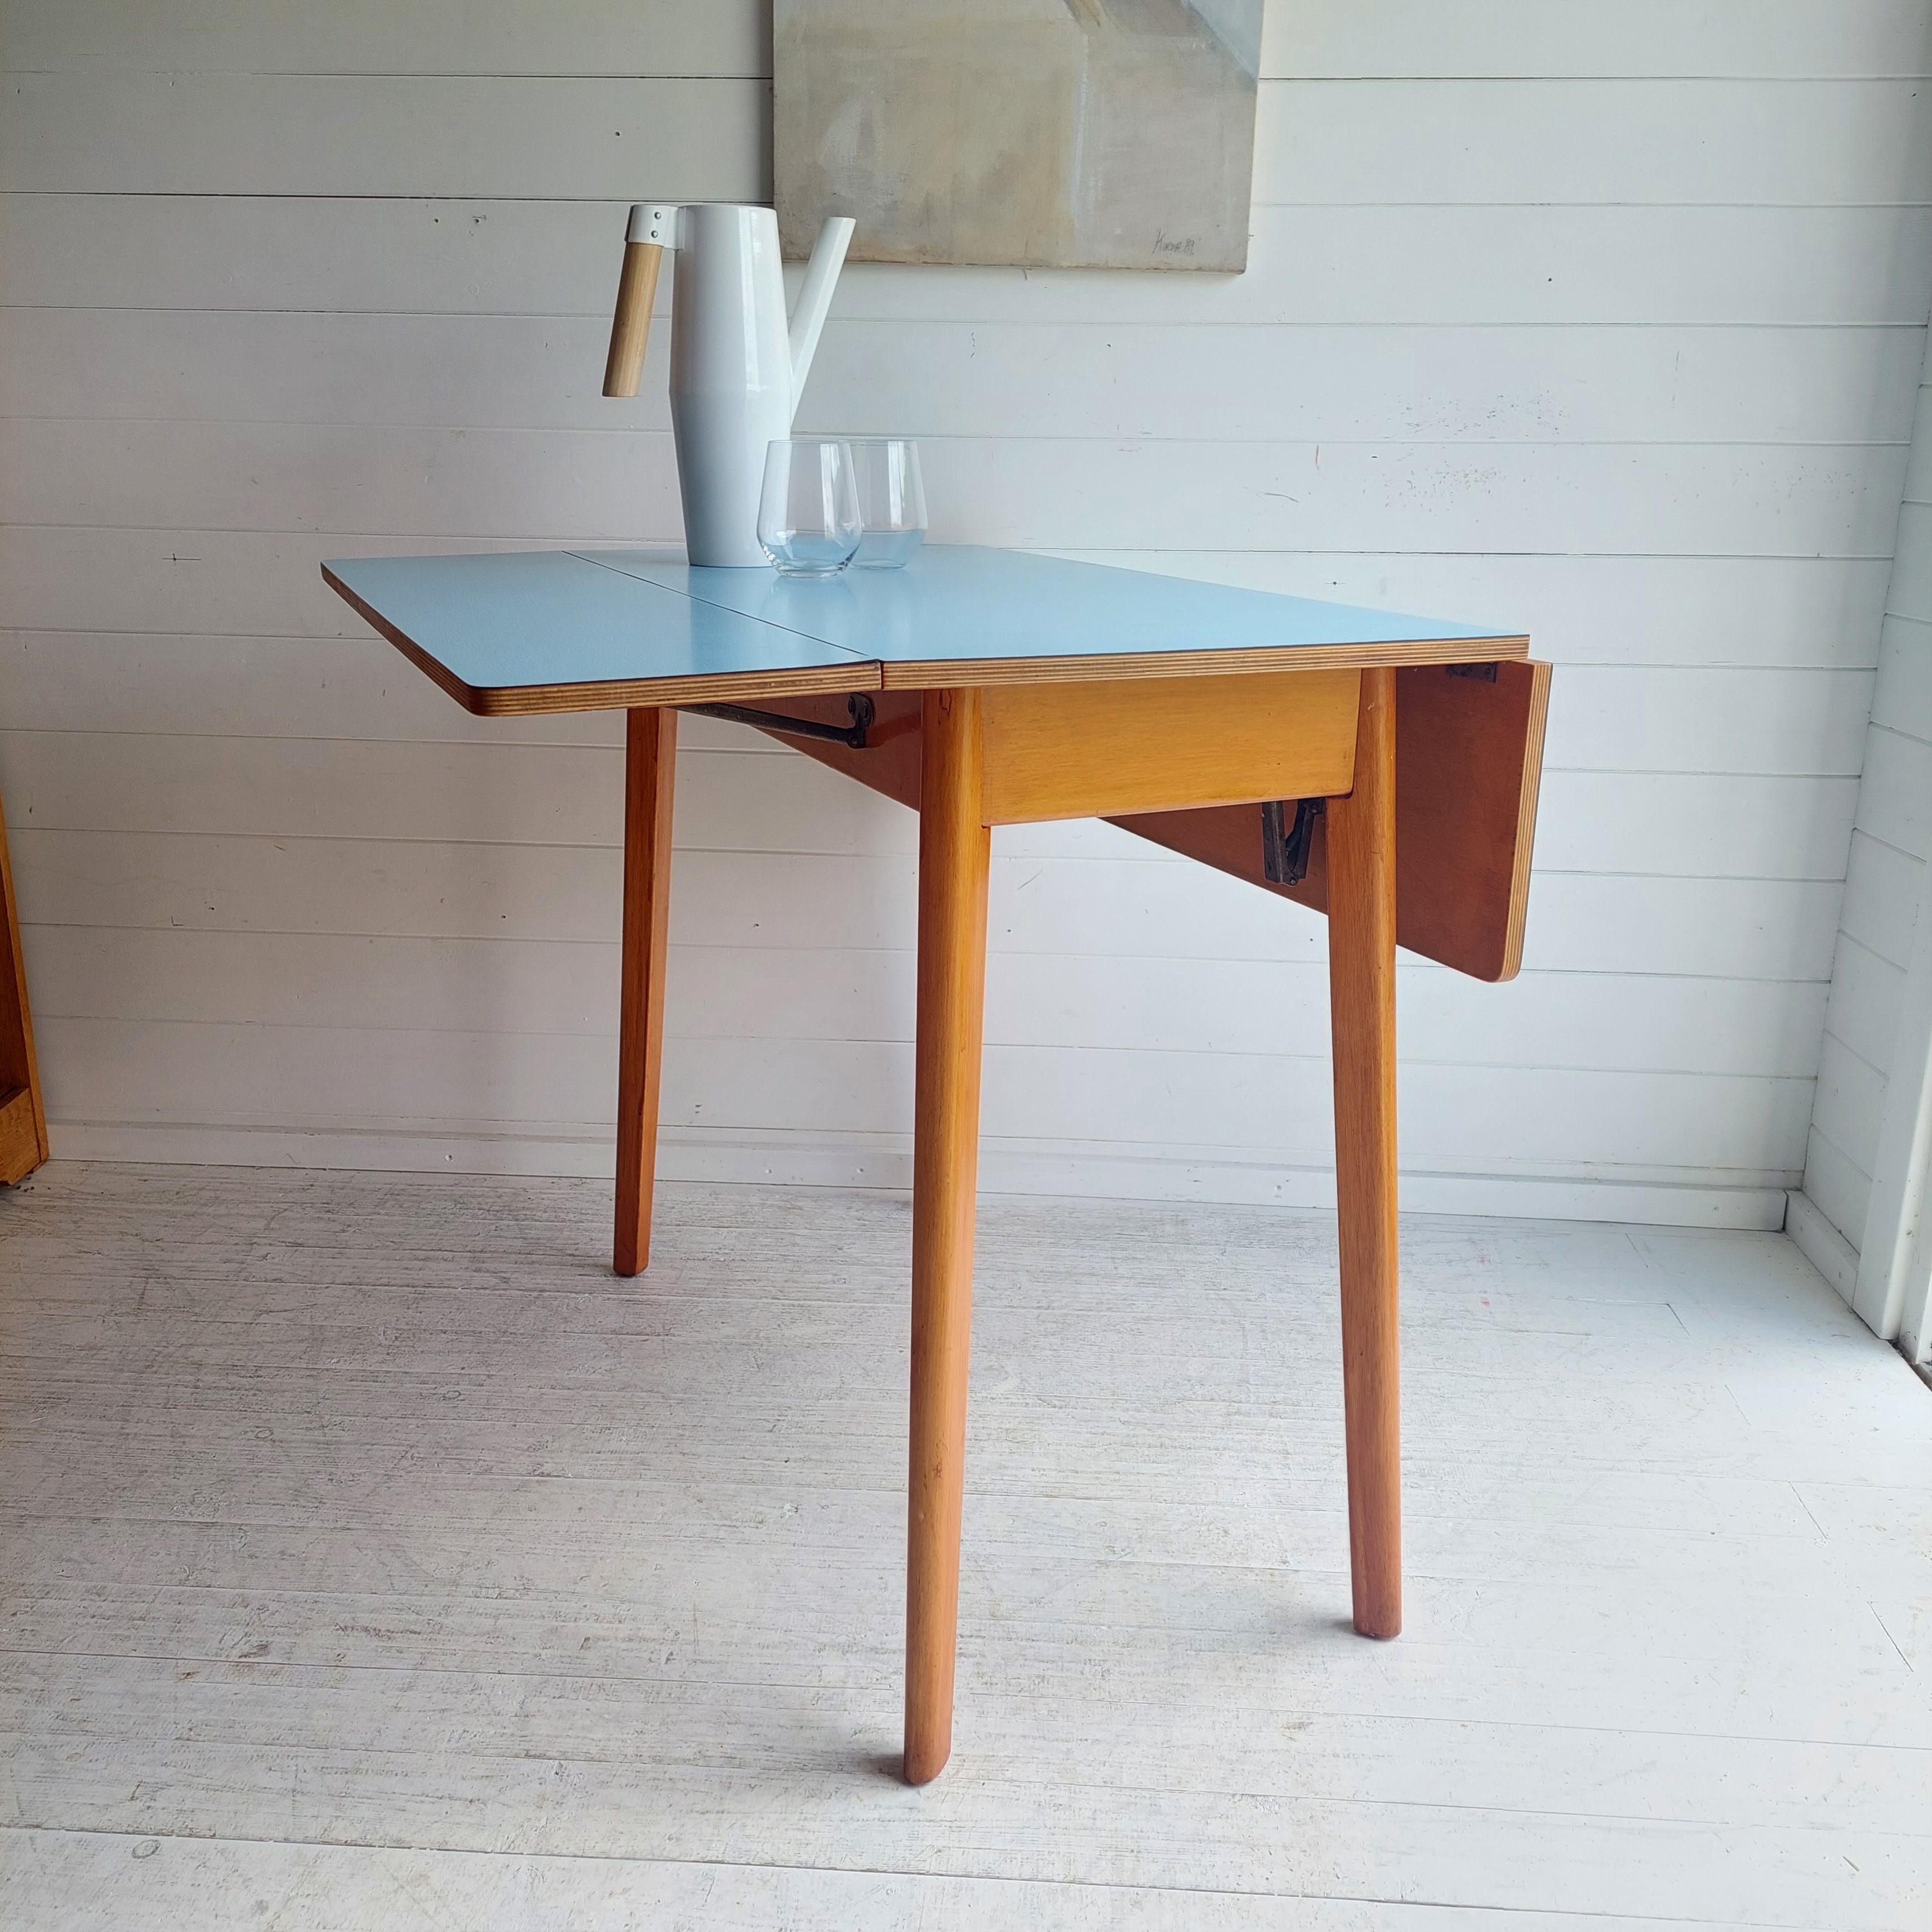 MID CENTURY DINING TABLE

CIRCA 1950s/60s

Original baby blue 1960's formica drop leaf table that seats 2-4 people
A great vintage addition to any small kitchen or living/dining room!
Beautiful baby blue formica topped kitchen dining table.
Sits